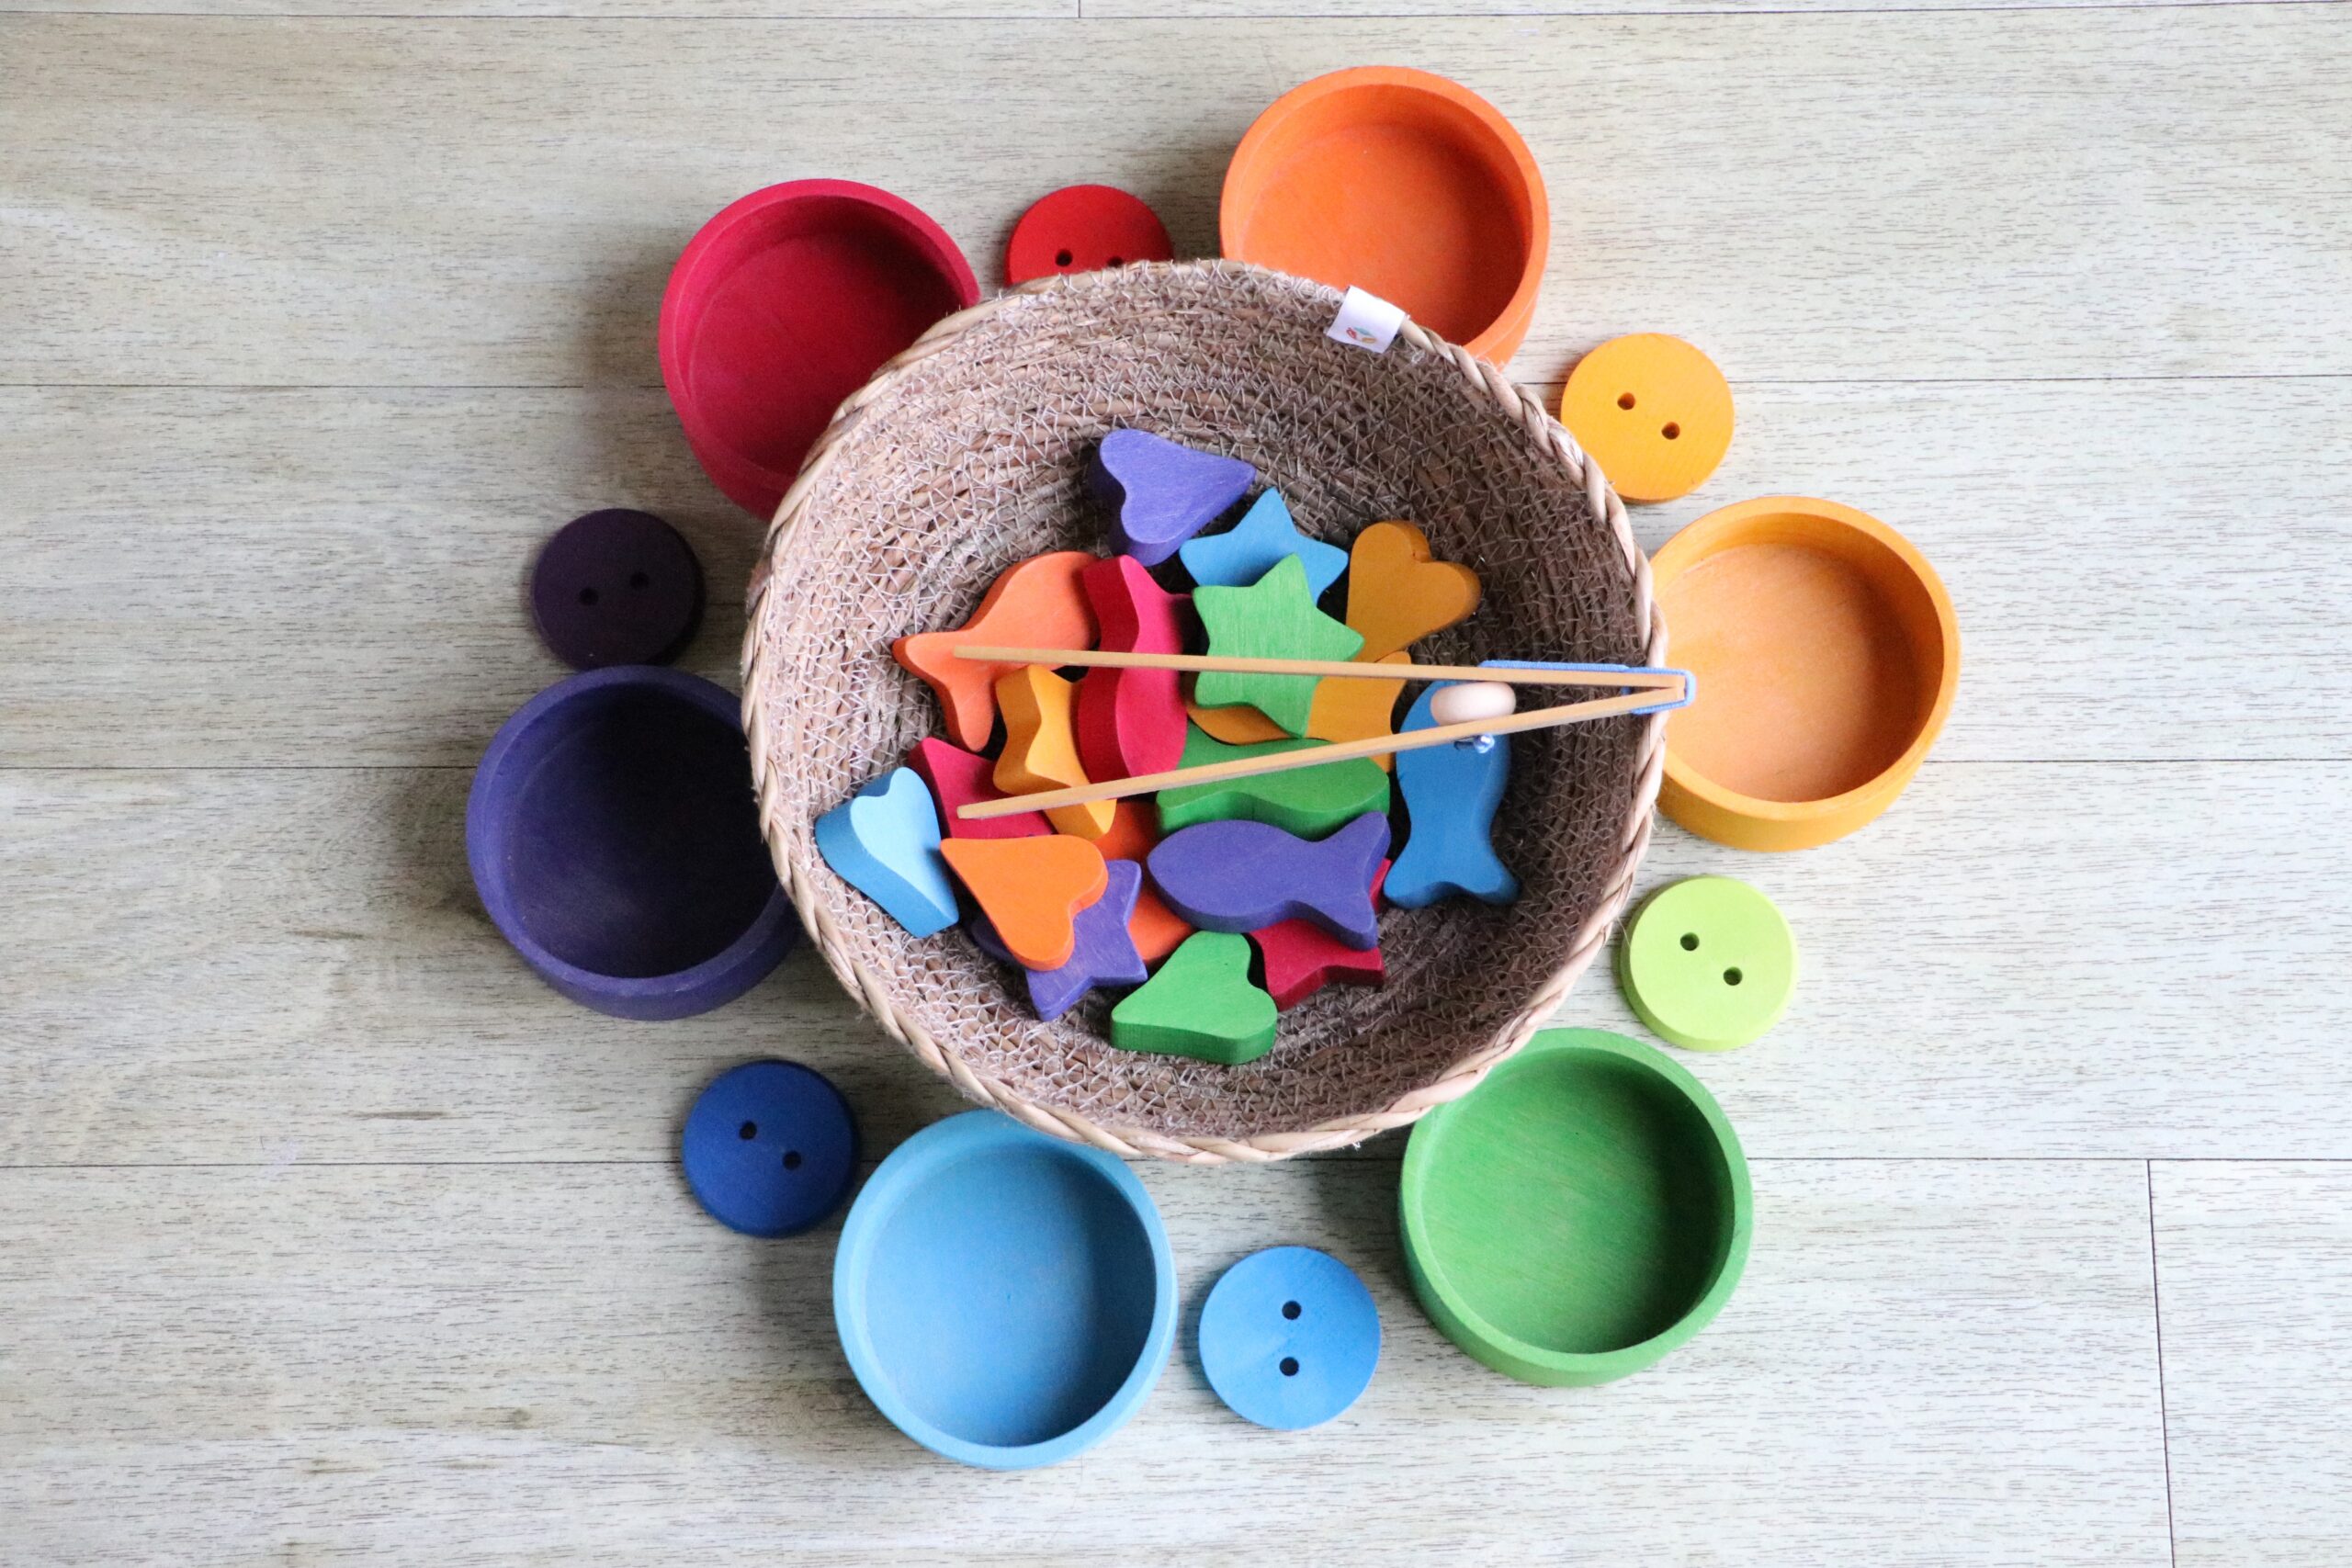 Round assorted-colors plastic cases. In the center one there are several wooden colorful figurines, shaped like fish, hearts and stars.